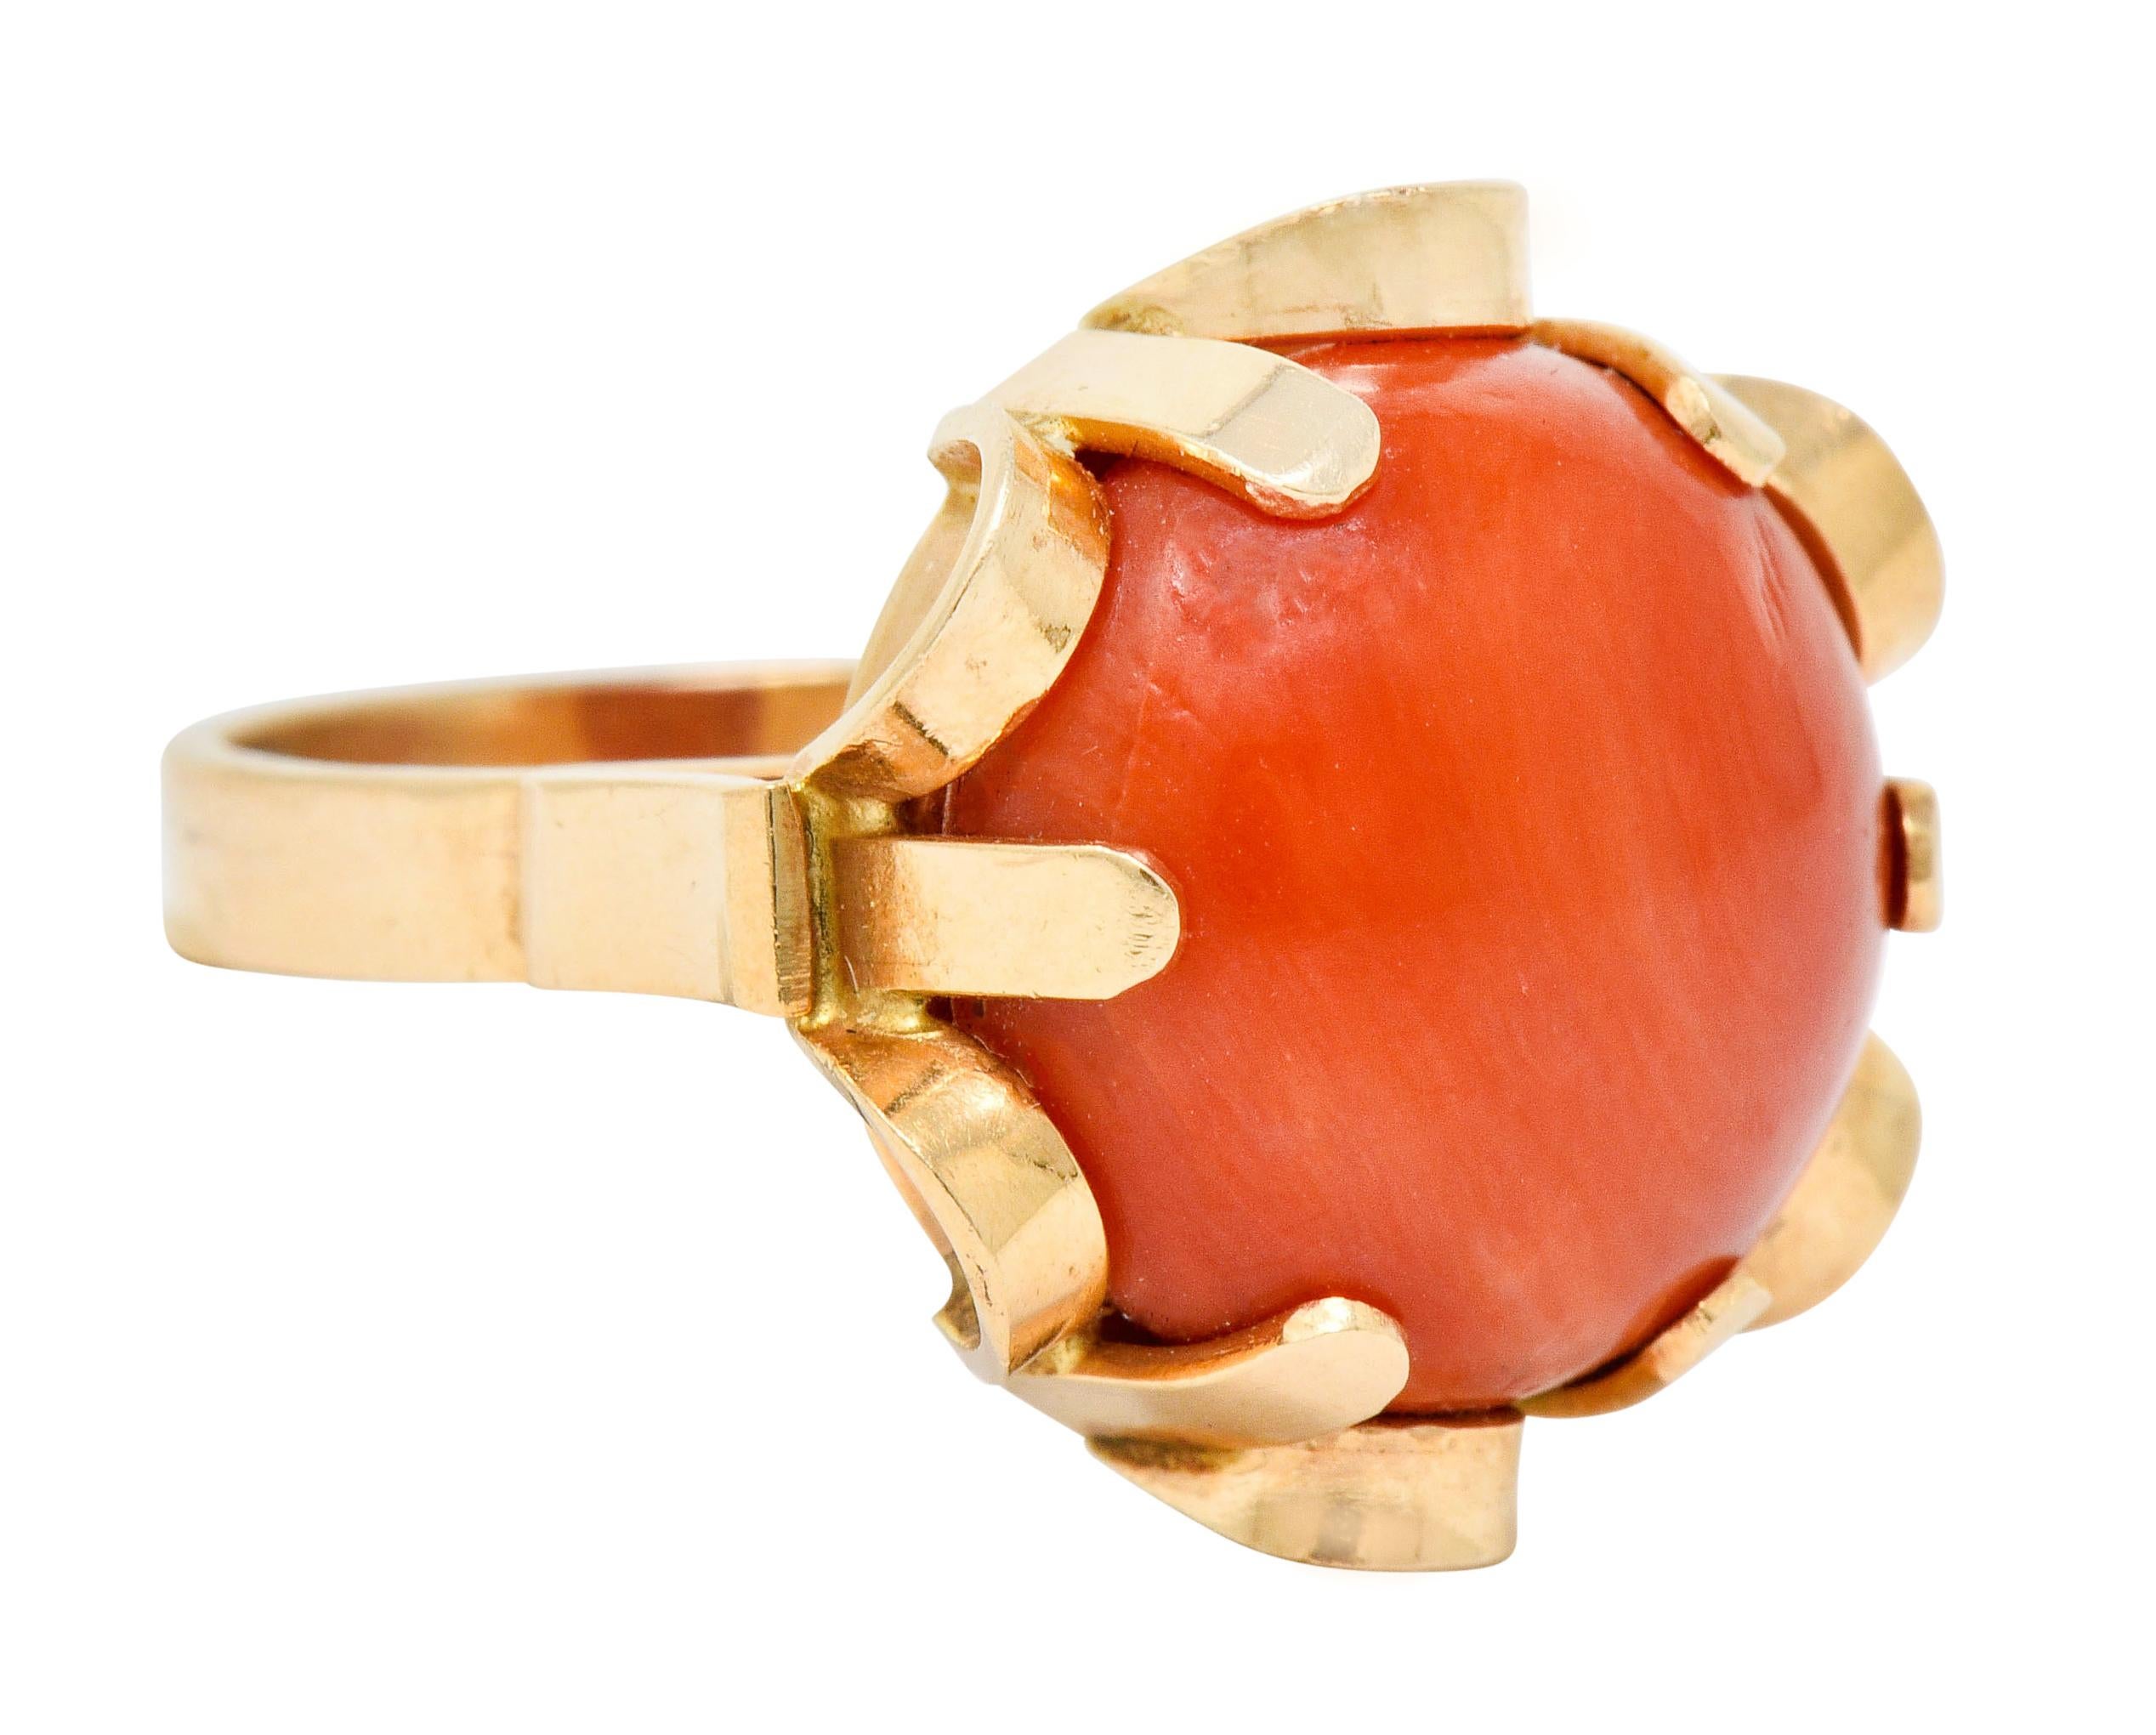 Centering a round coral cabochon, robust reddish-orange in color; with good surface quality and luster

Prong set and surrounded by a stylized and dynamically looped floral motif

Tested as 14 karat gold

With Polish assay marks, possibly for